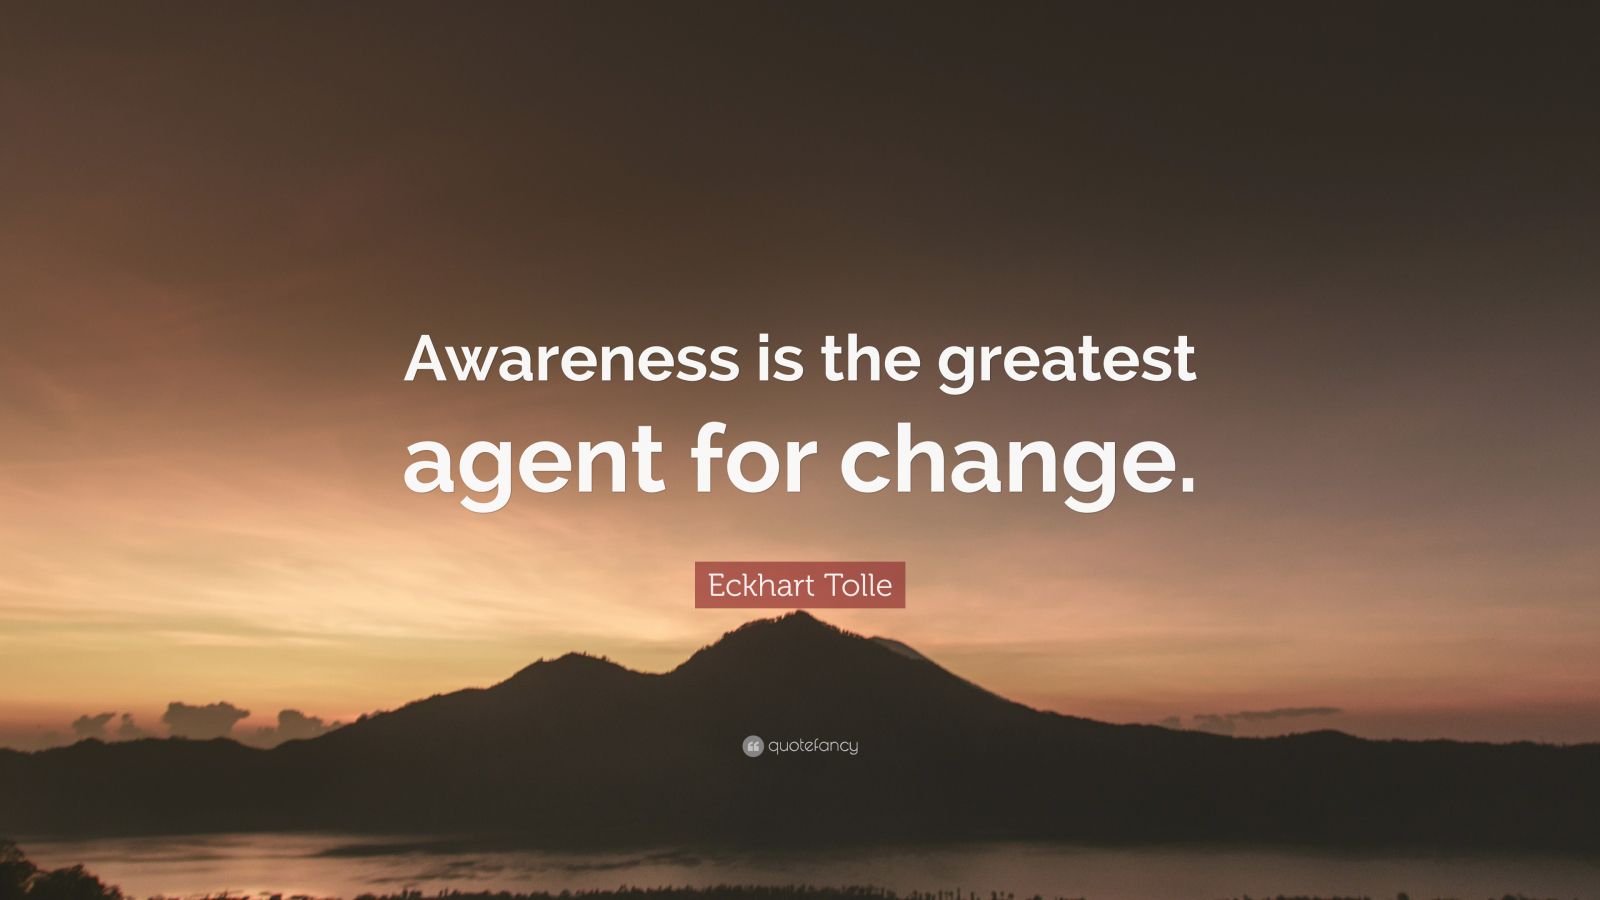 Eckhart Tolle Quote: “Awareness is the greatest agent for change.” (24